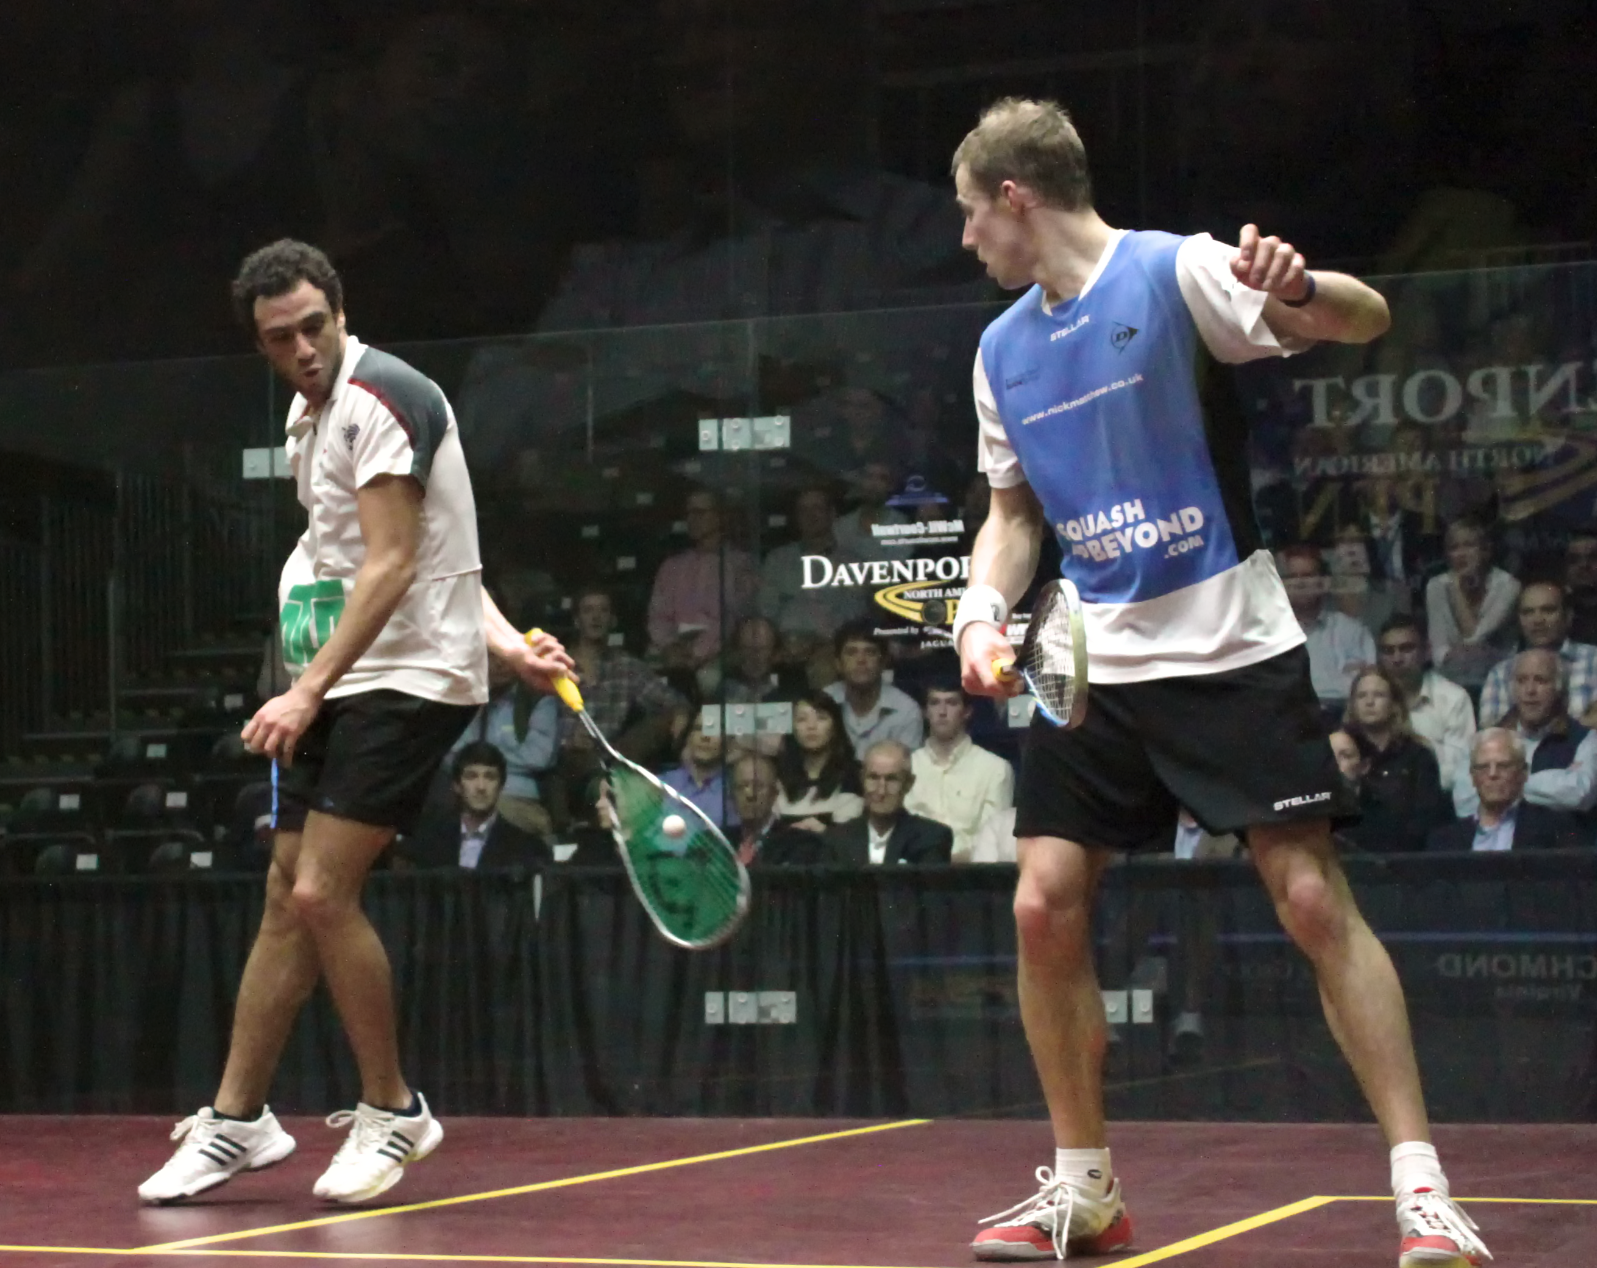 Even Ramy Ashour got into the acrobatic act against Nick Matthew with this behind-the-back winner.